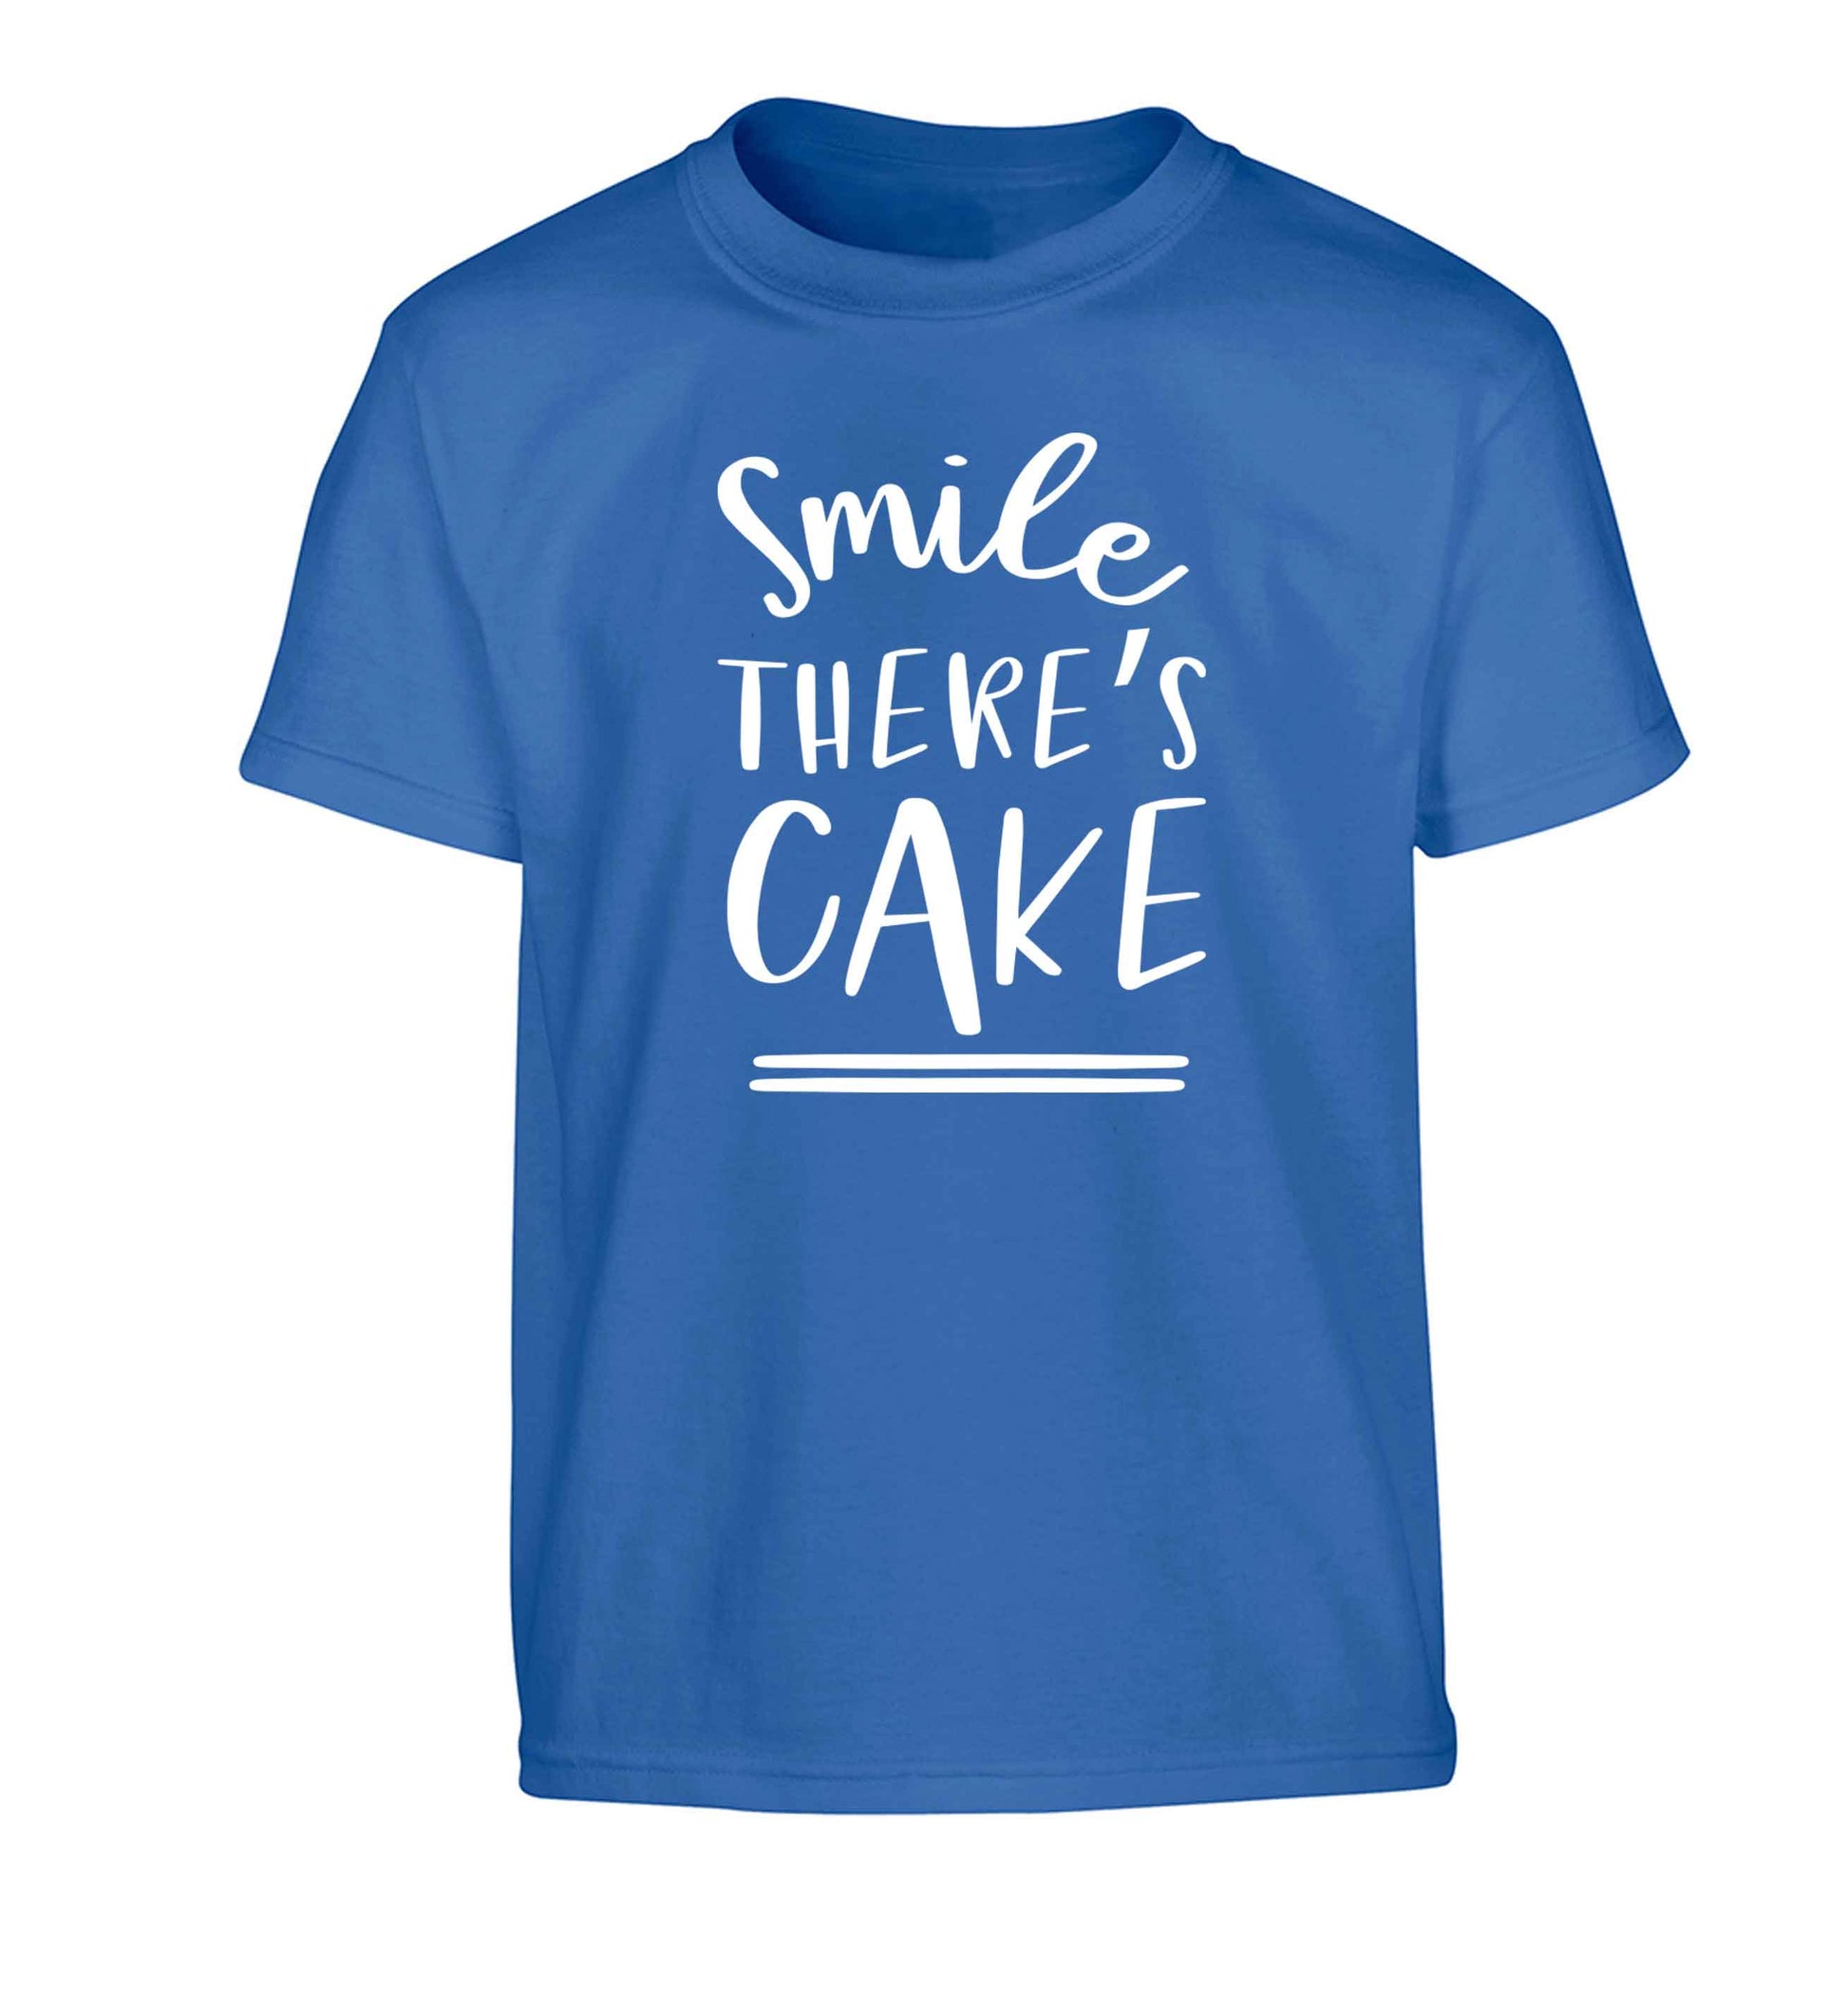 Smile there's cake Children's blue Tshirt 12-13 Years